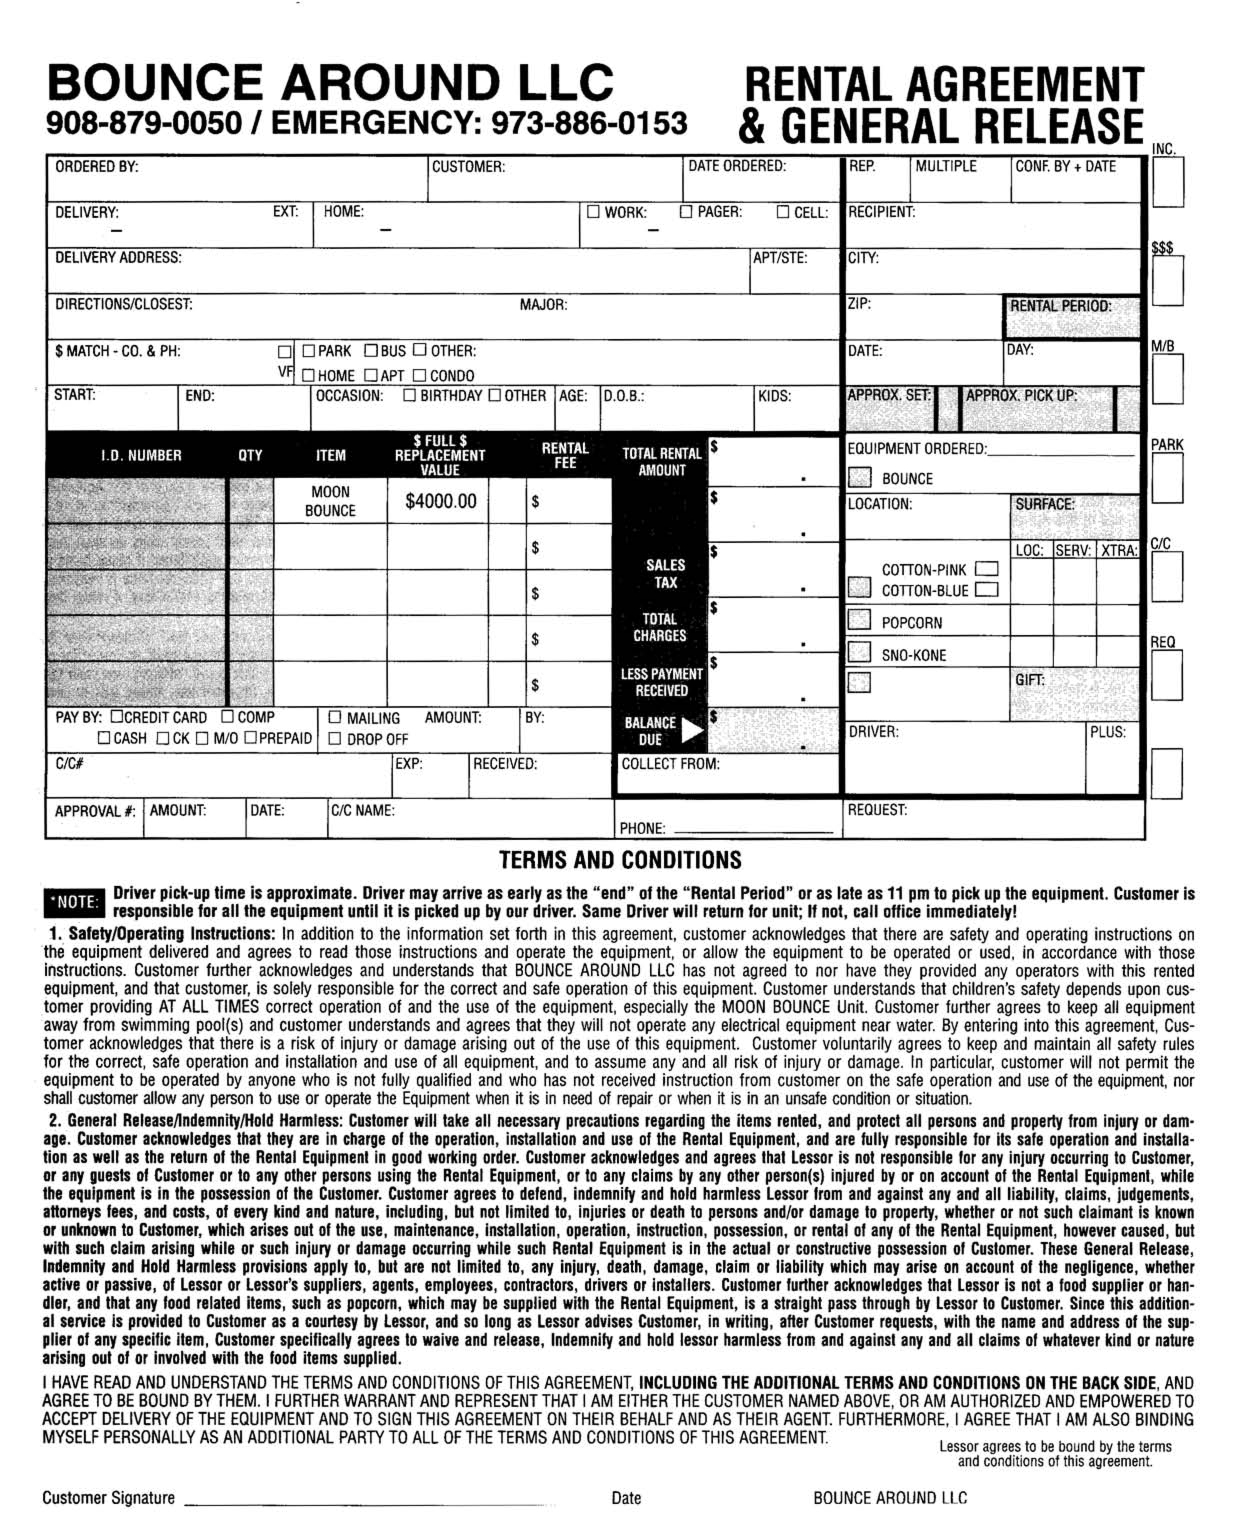 Bounce House Invoice  Moon Bounce Rental Agreement  Pdf  Places pertaining to Bounce House Rental Agreement Template